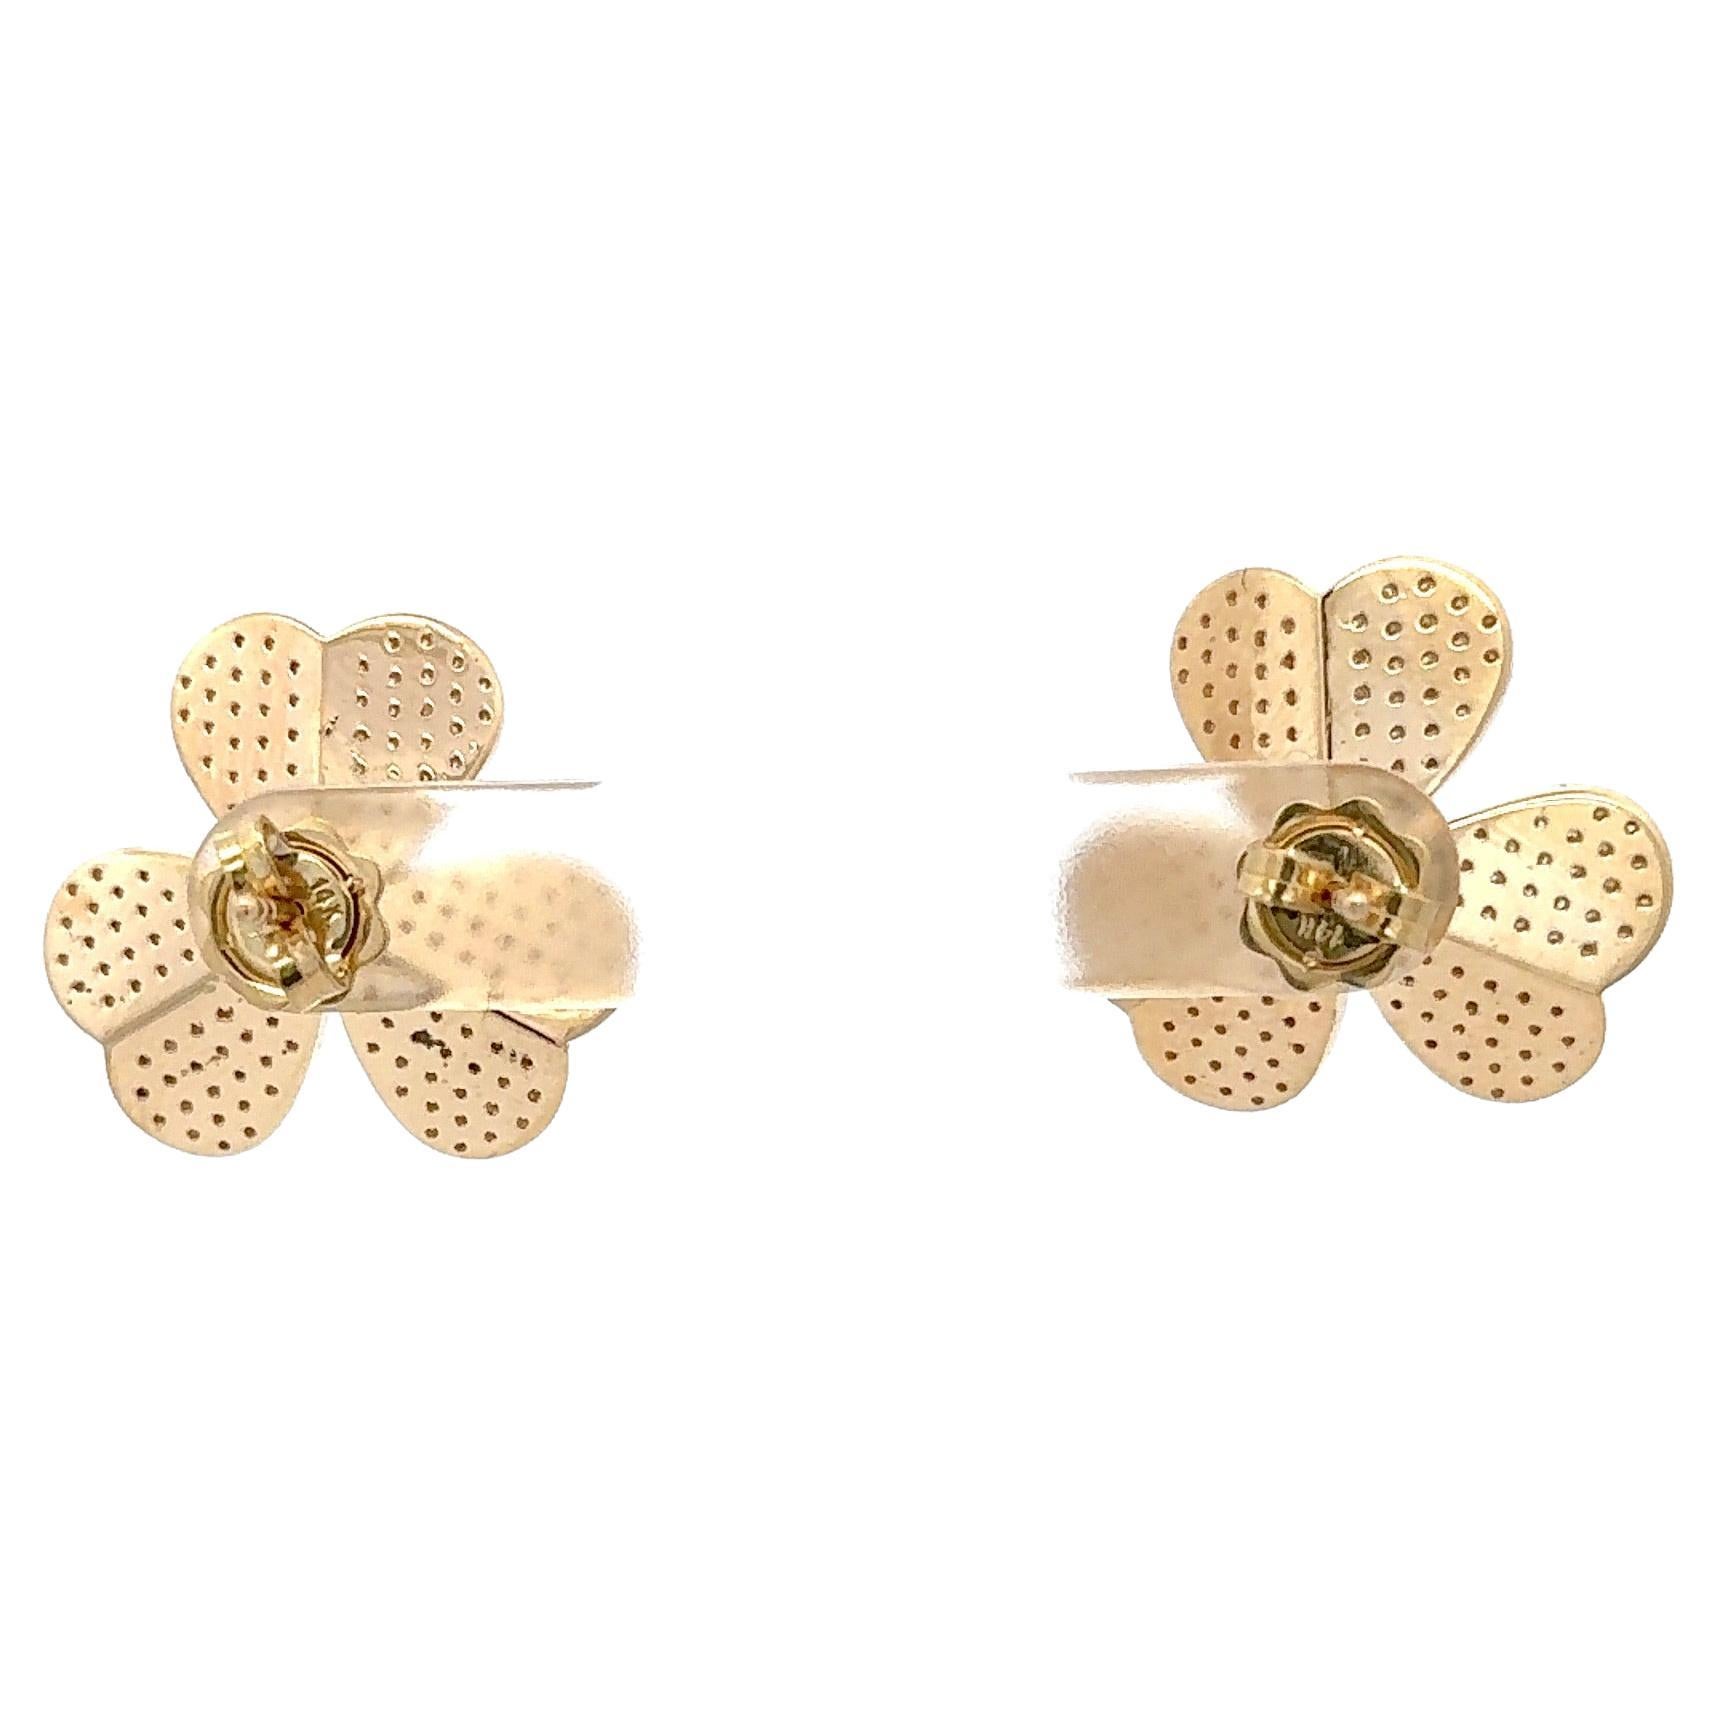 Large diamond stud earrings featuring a floral design containing 306 round brilliants weighing 2.02 carats, in 14 karat yellow gold. 
Color F
Clarity VS